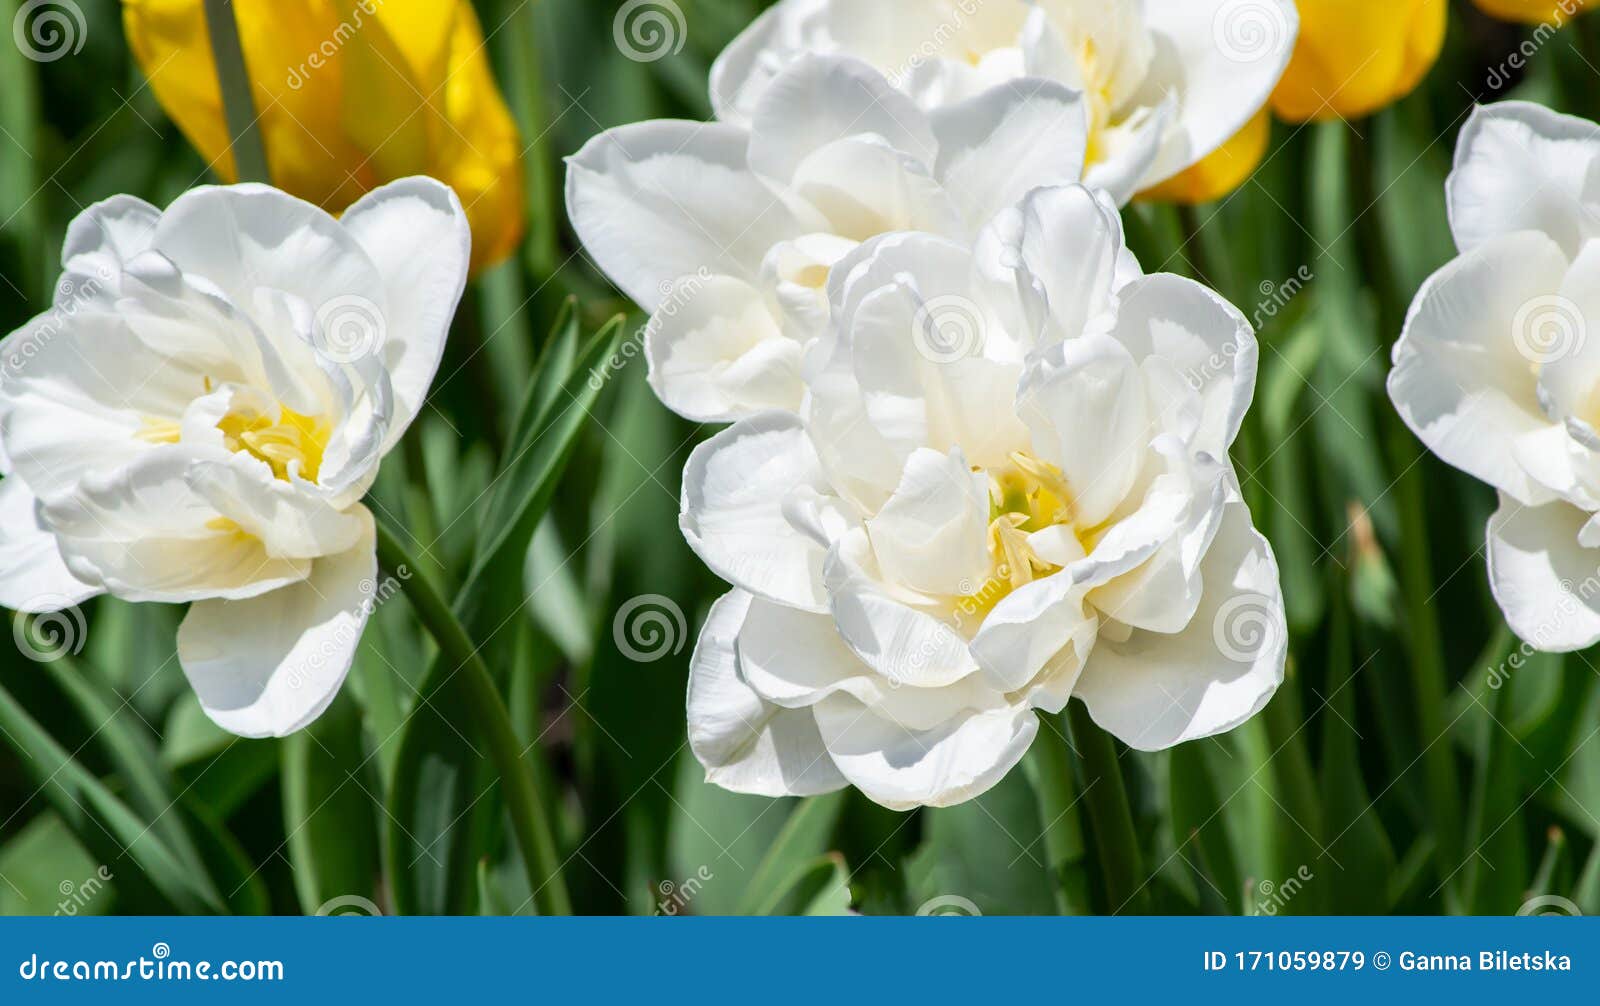 White Terry Daffodils in a Field among Yellow Tulips Stock Image ...